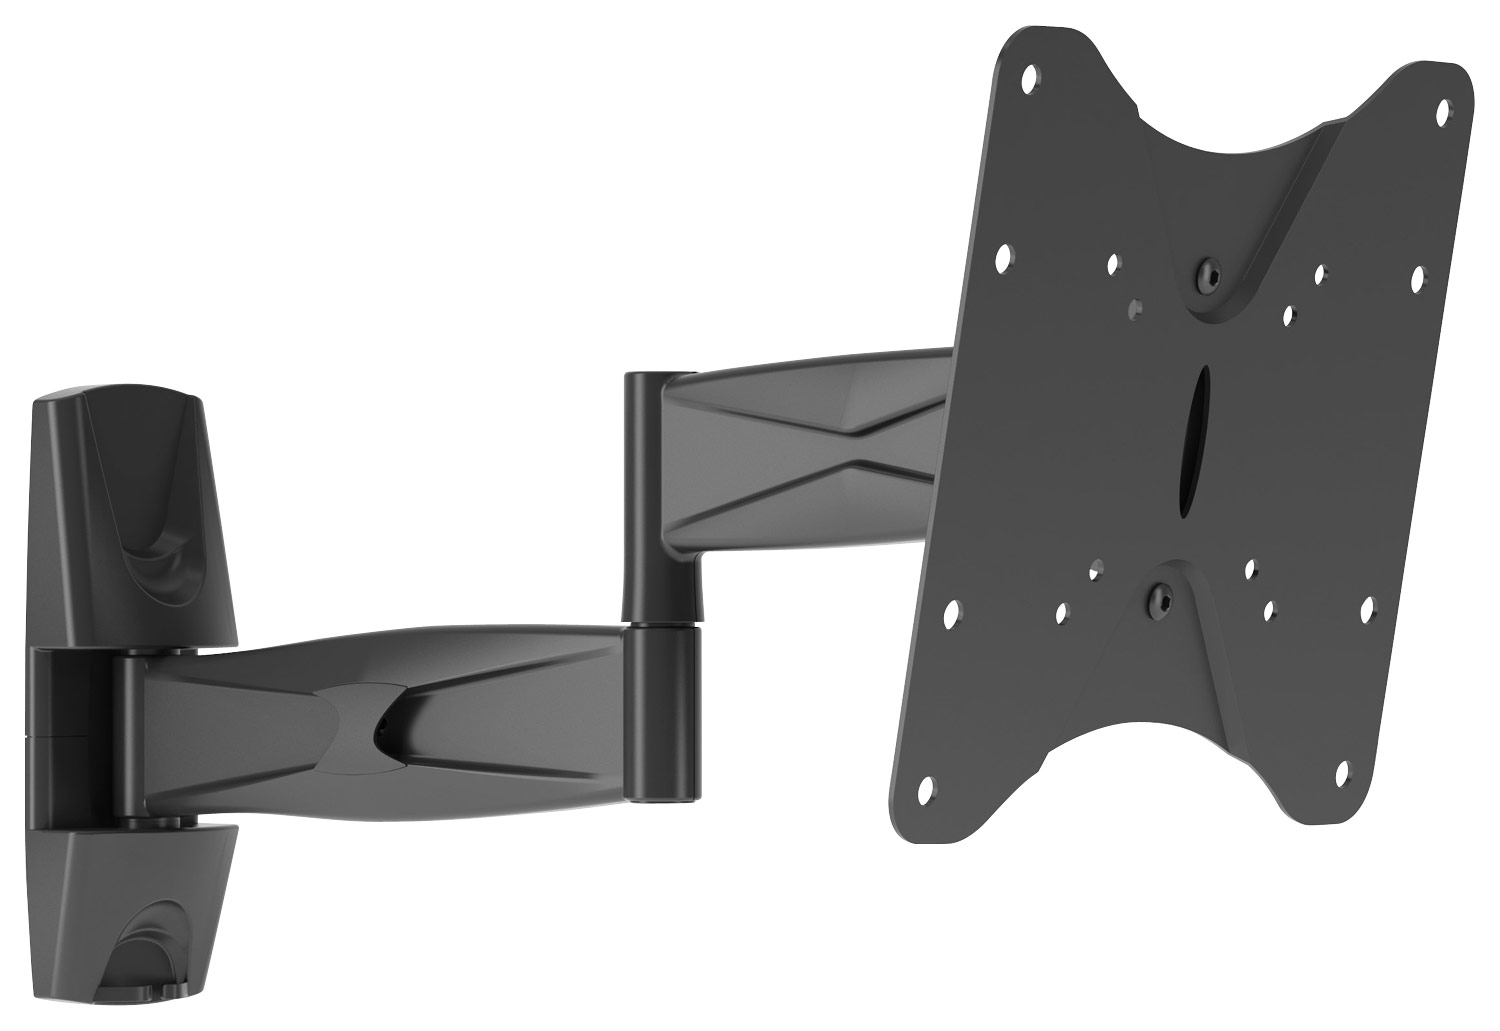  CorLiving - Full-Motion TV Wall Mount for Most 17&quot; - 37&quot; TVs - Extends 17&quot; - Black